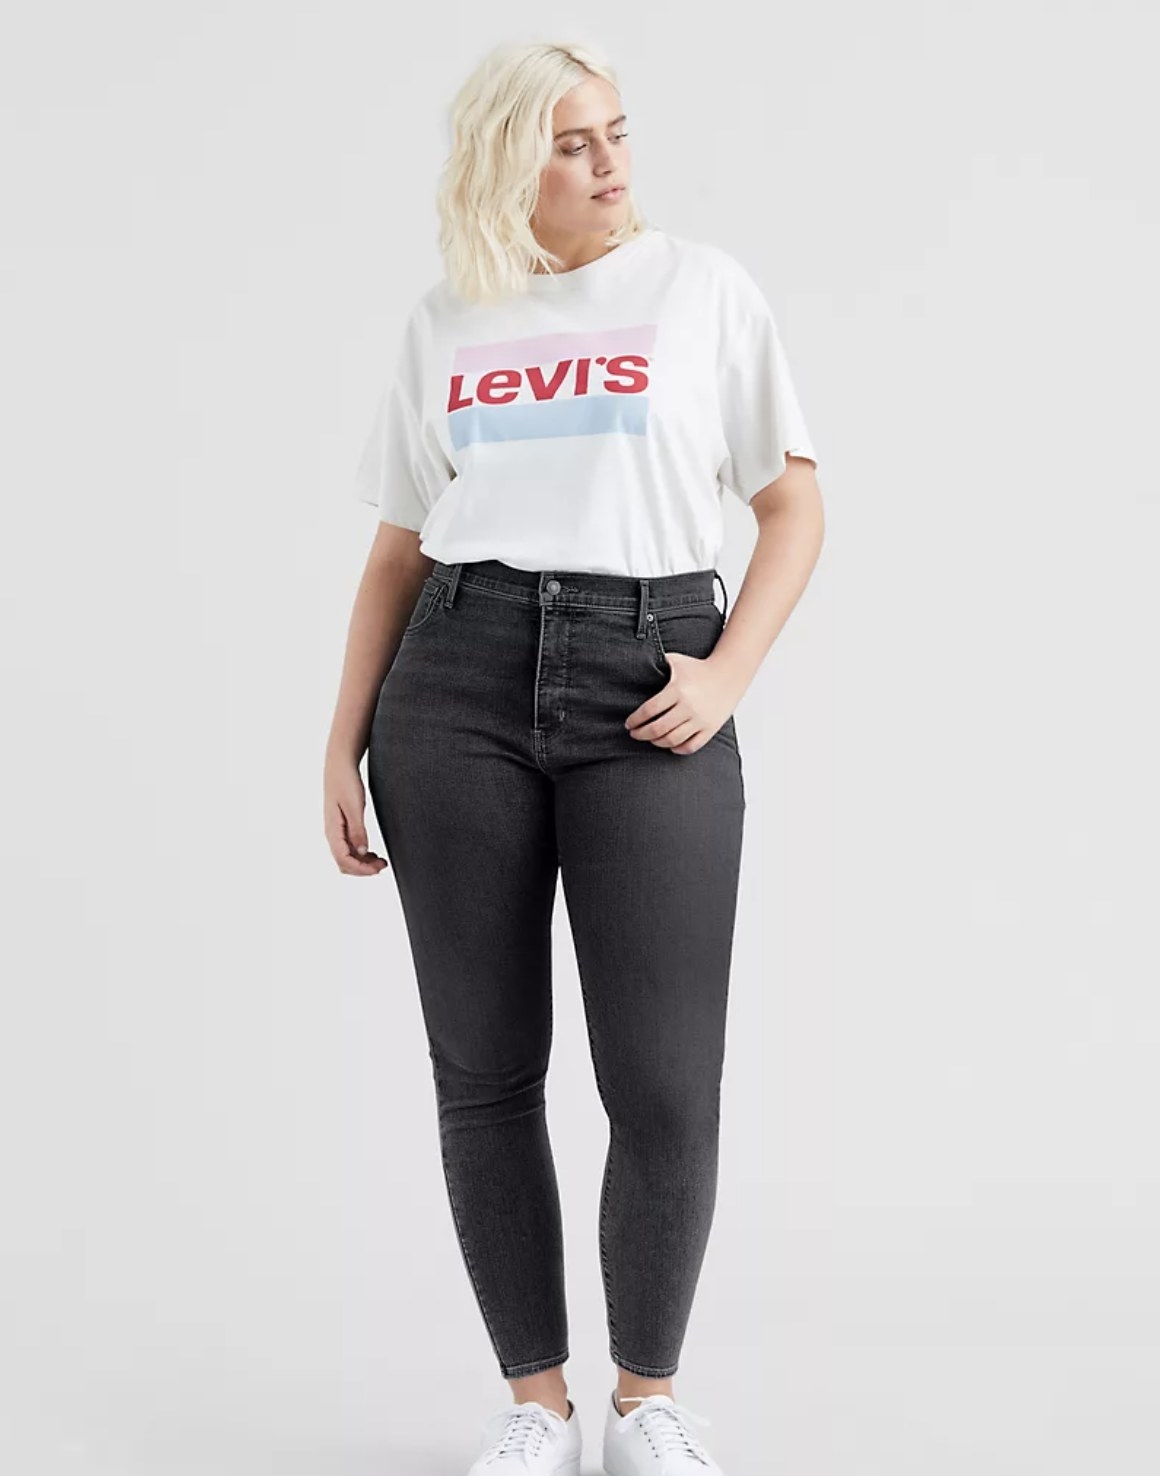 Model is wearing black skinny jeans and a white graphic tee